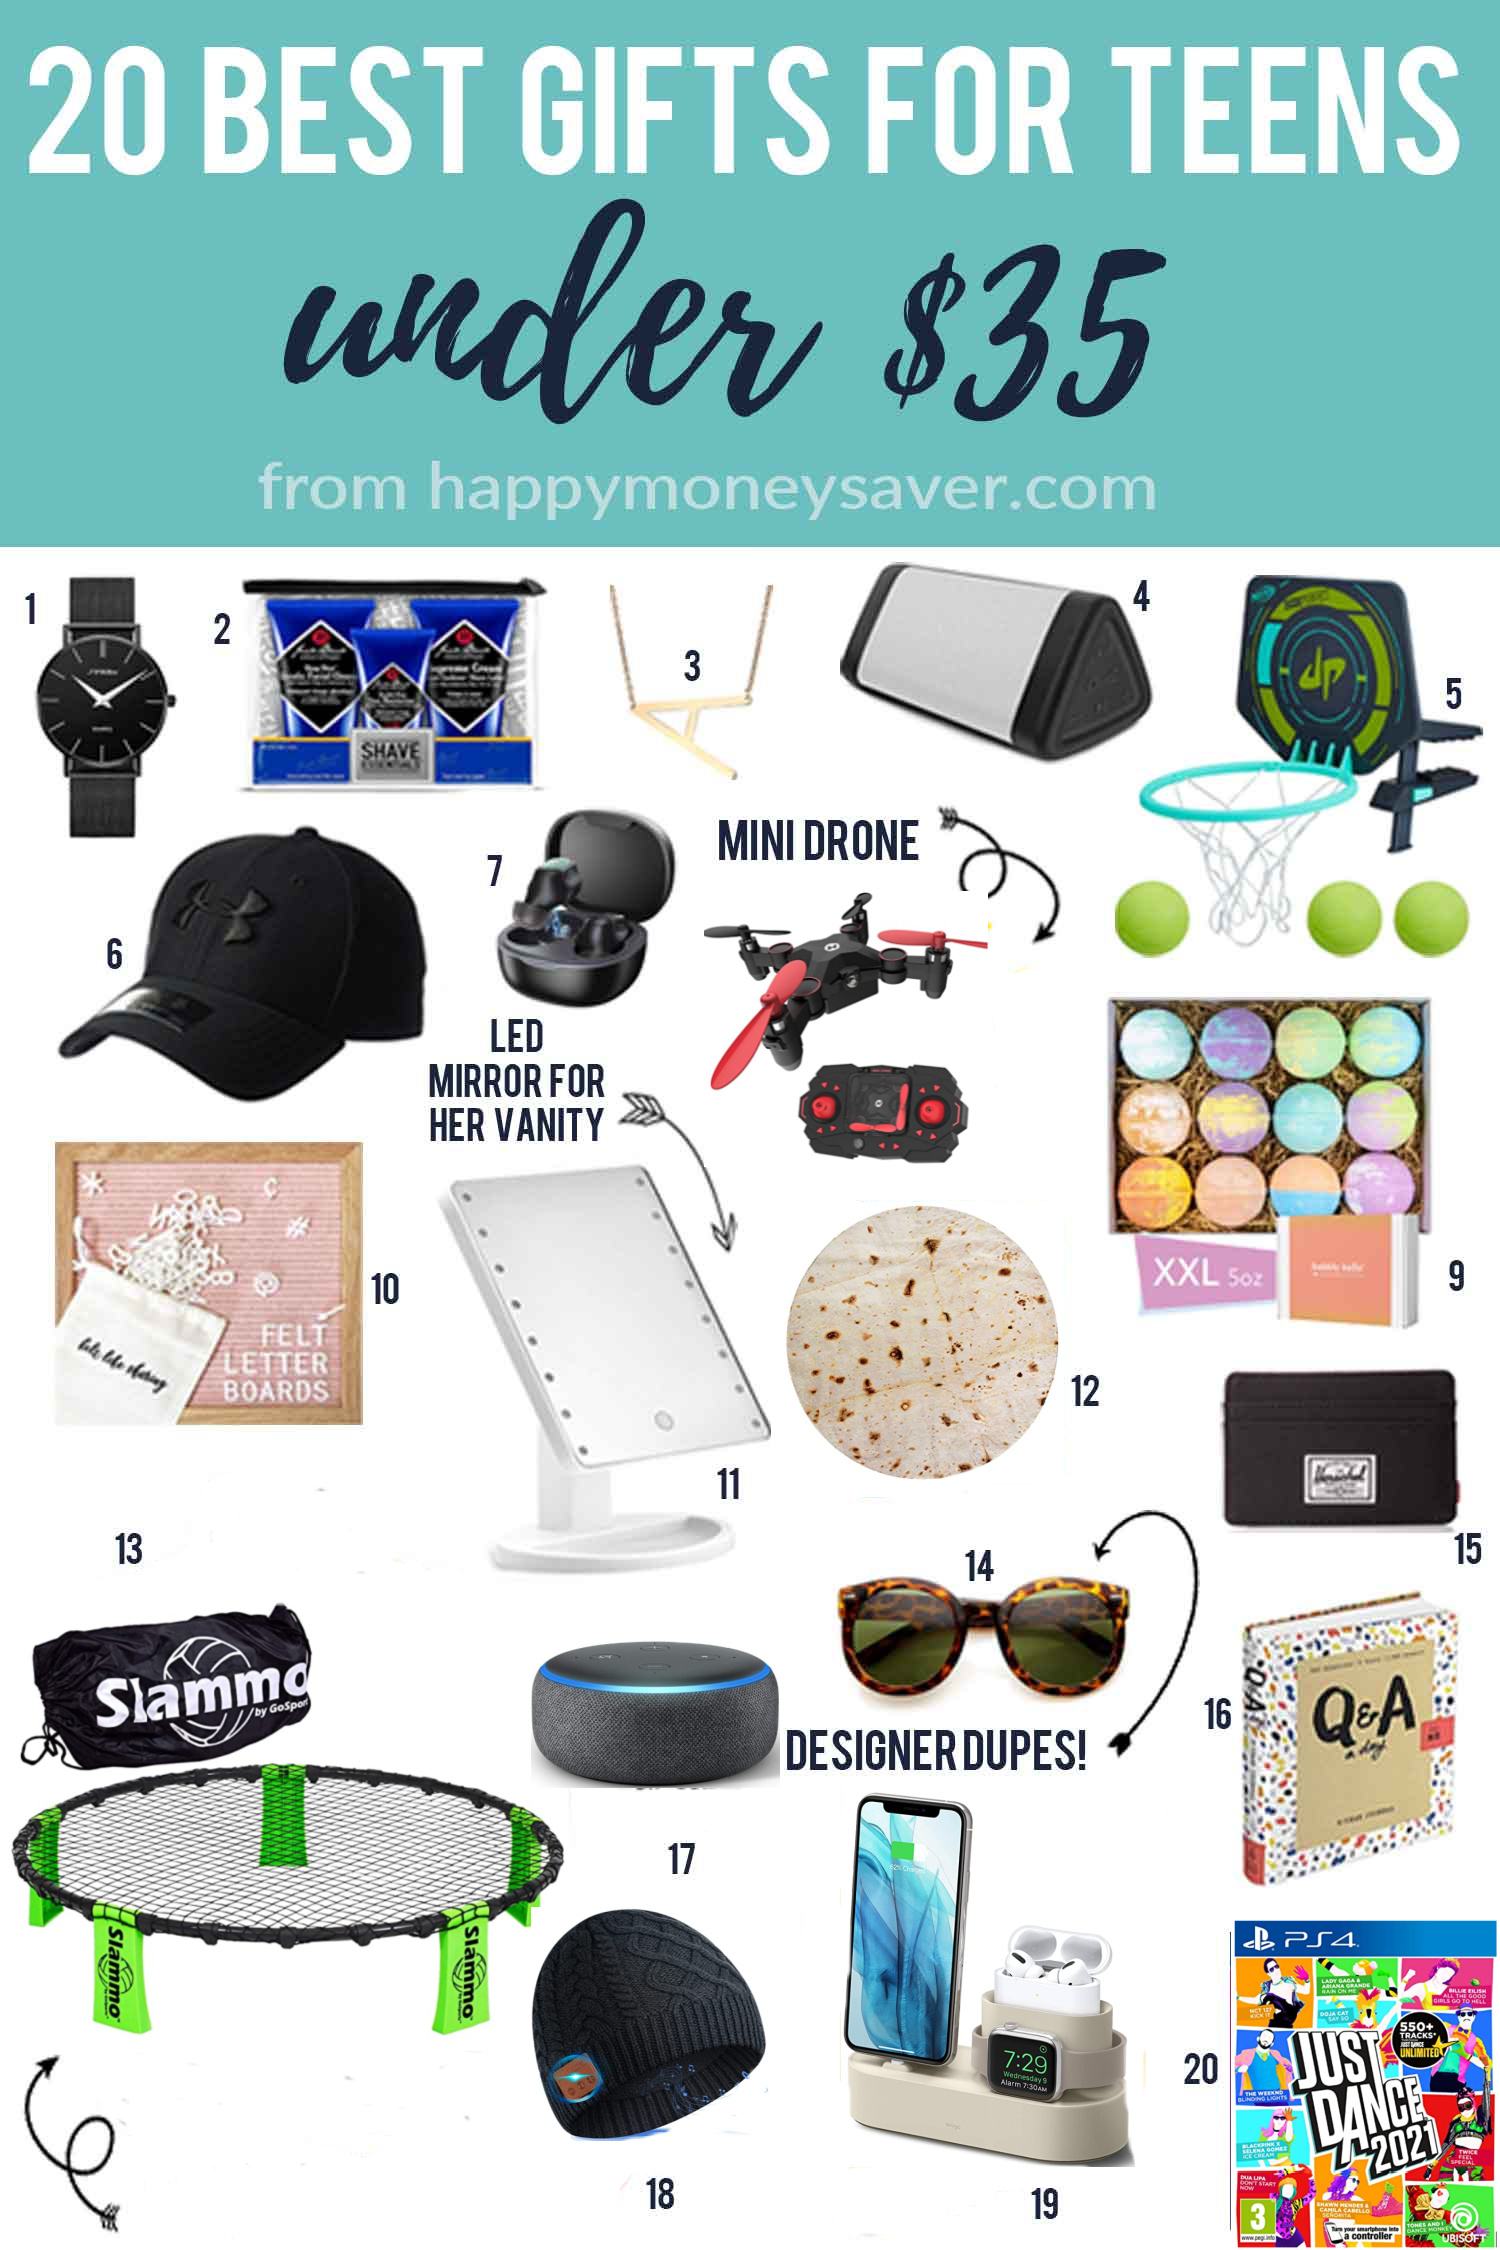 Image of 20 best gifts for teens under $35 from Happymoneysaver.com with numbered images of each item.